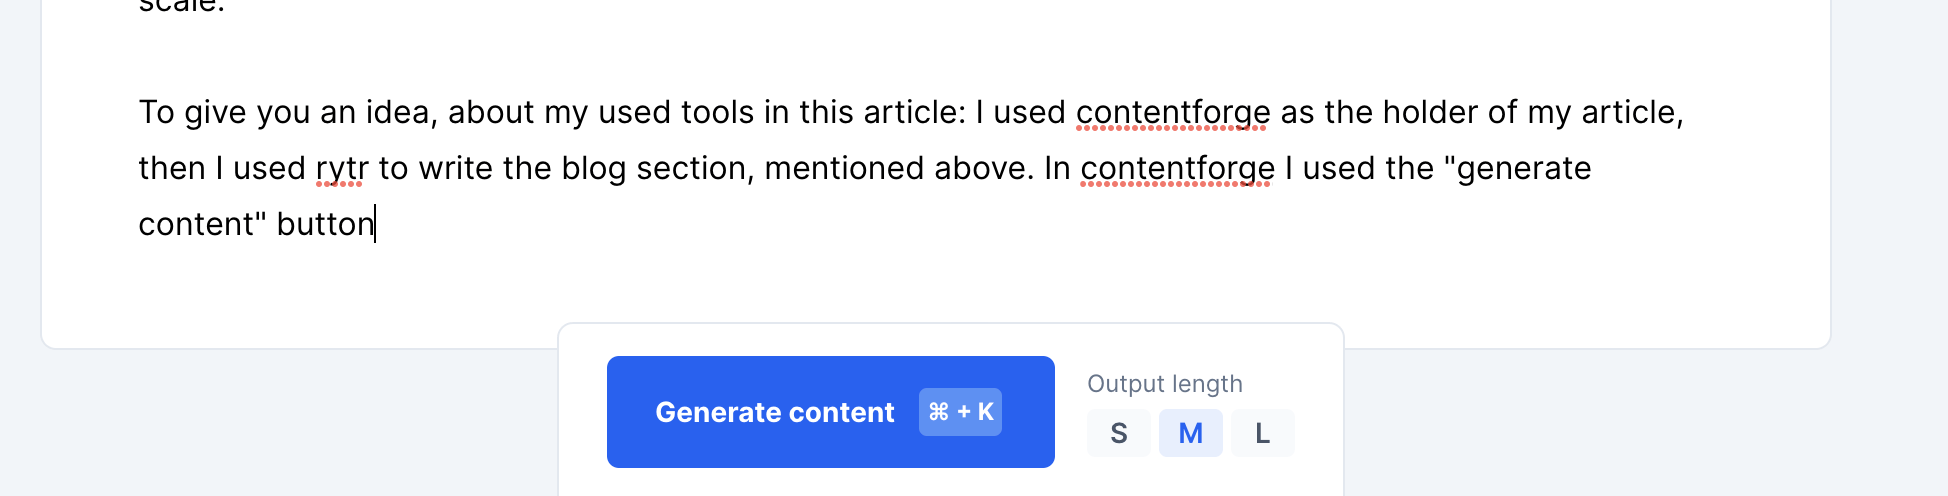 AI assistants writer feature generate content